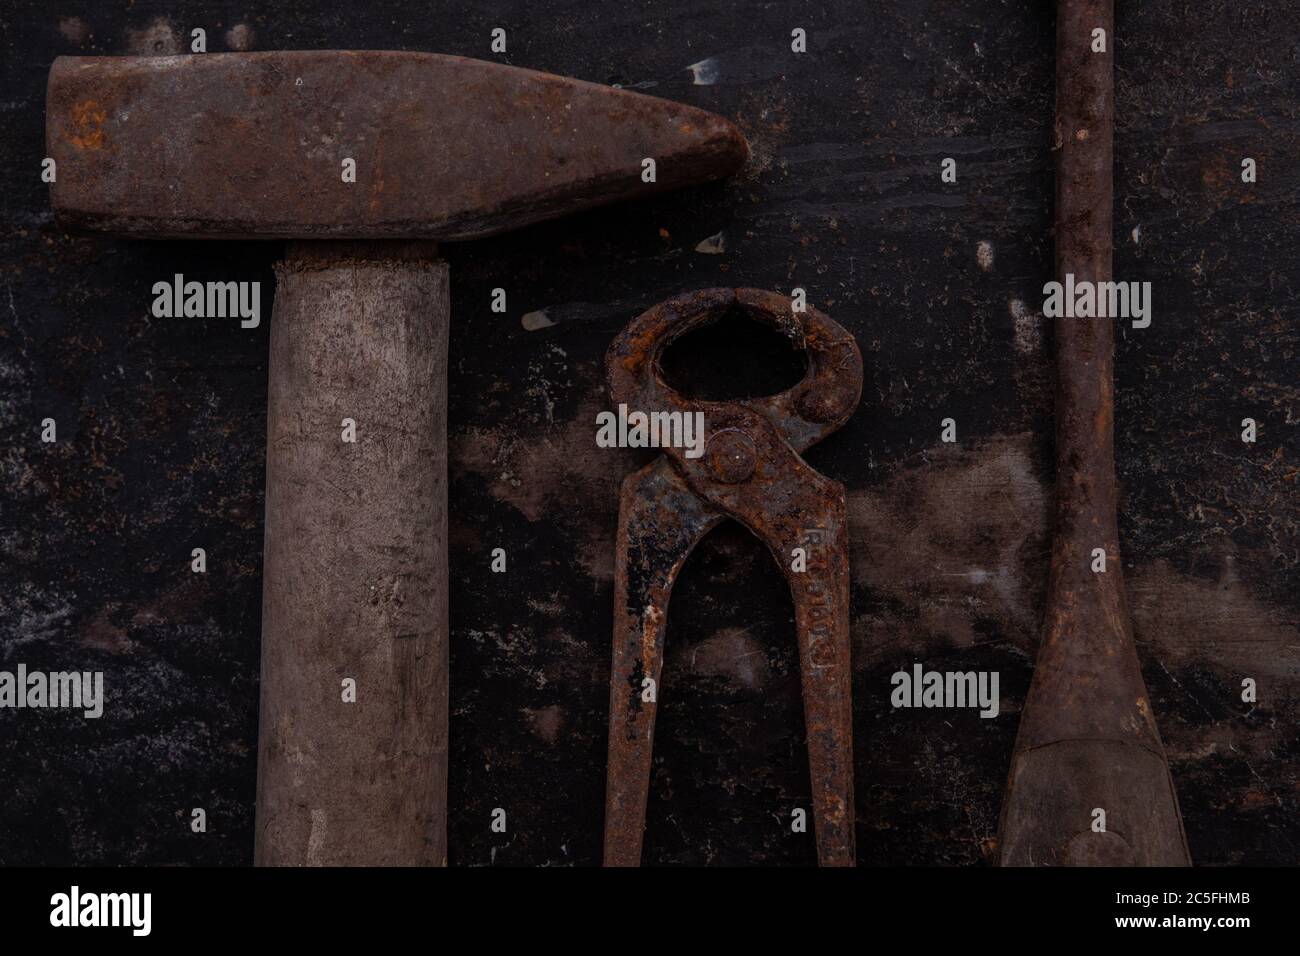 old tools, hammer, chisel, spatula measuring tape and brushes greasy and dirty heavily rusted lie on a metal dark background Stock Photo